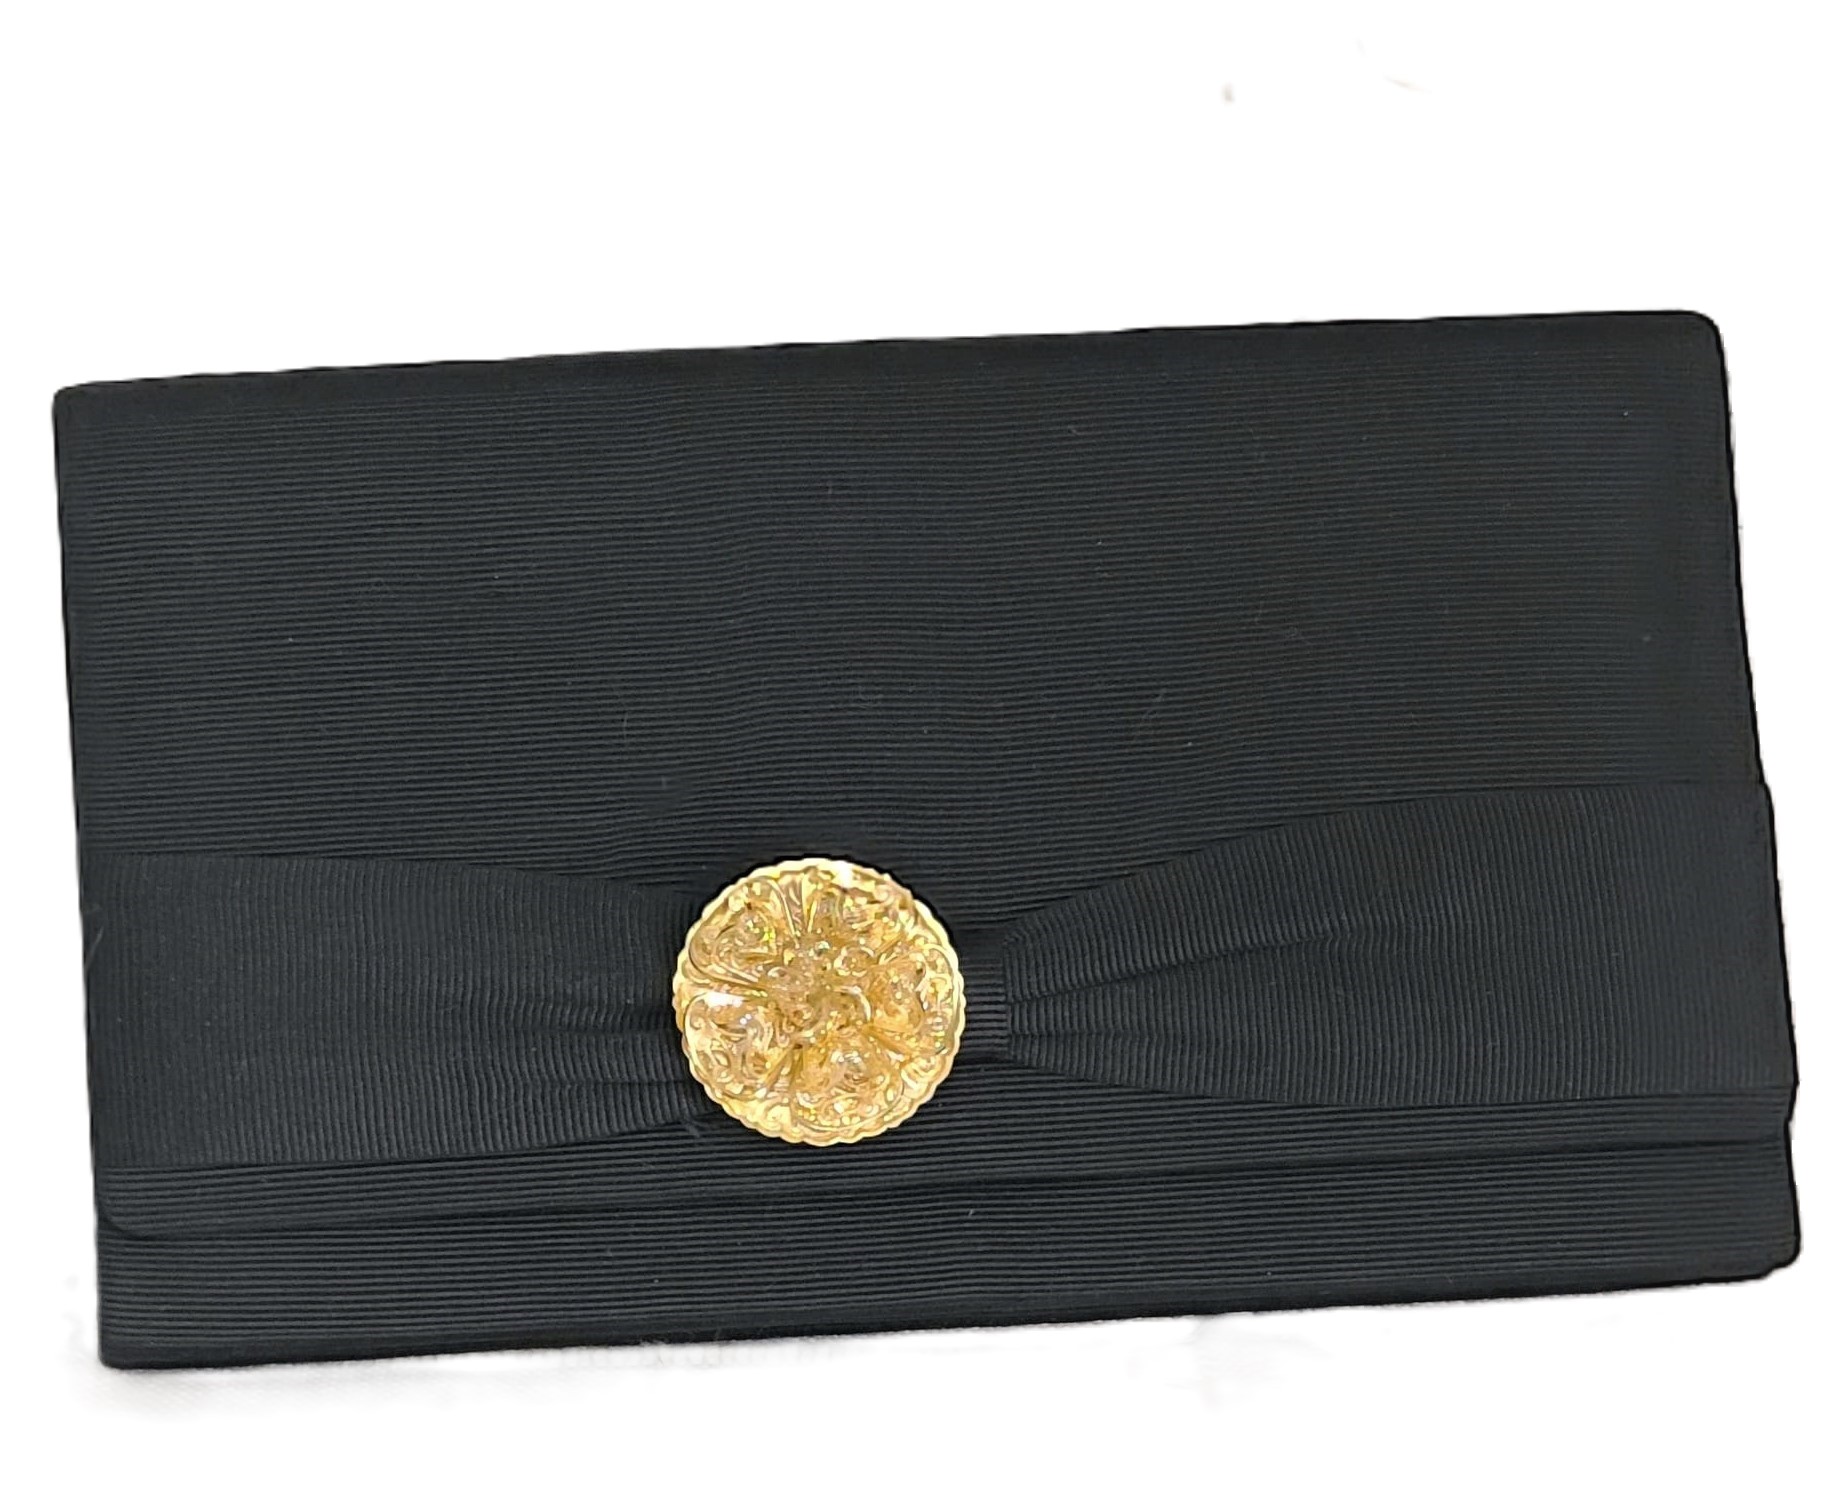 Black vintage clutch purse with bow, filigree gold scarf clip